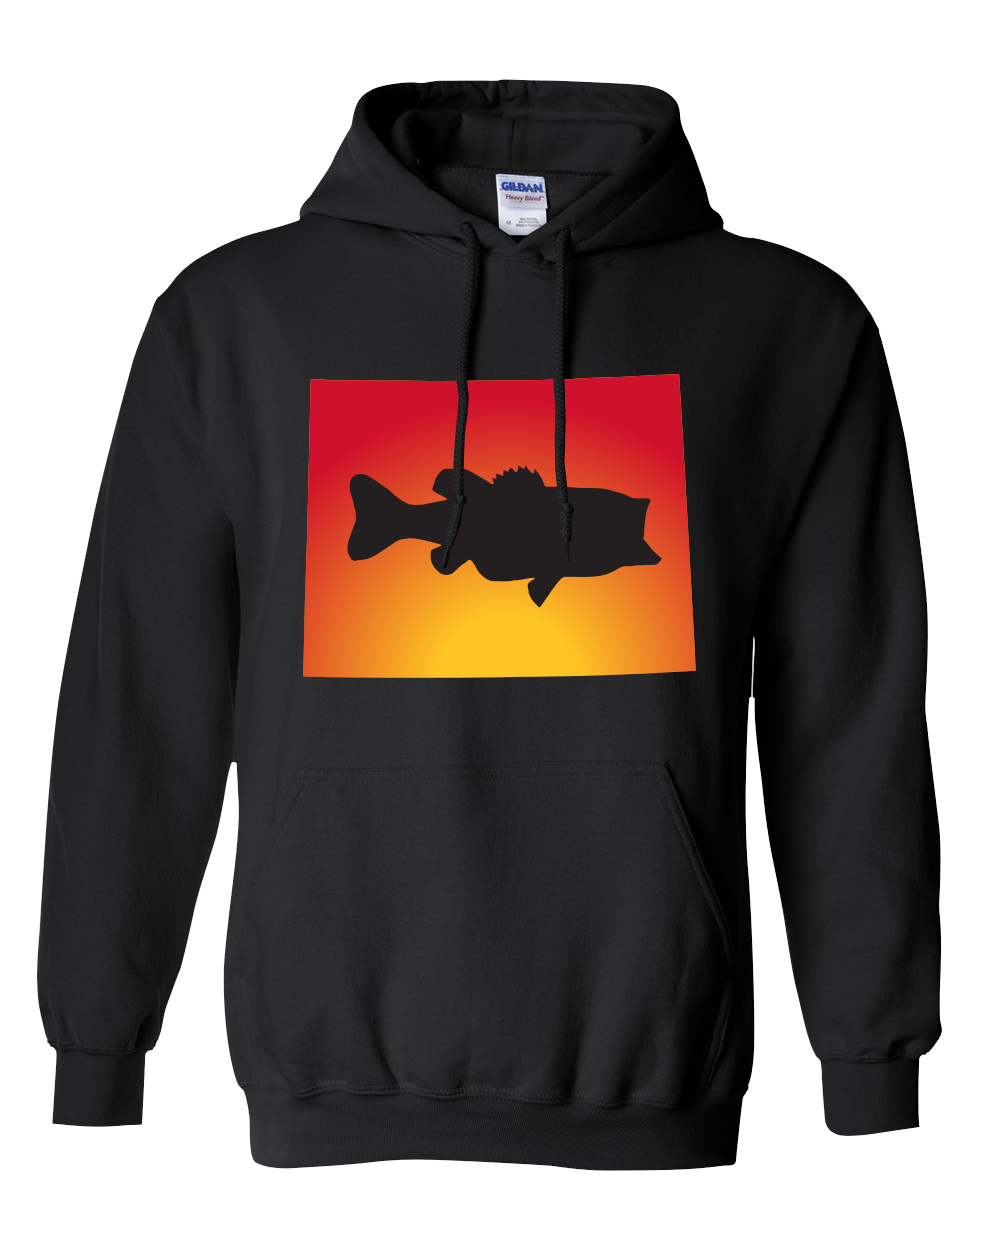 Pullover Hooded Sweatshirt Wyoming Black Large Mouth Bass Vibrant Design High Quality Tight Knit Ring Spun Low Maintenance Cotton Printed With The Newest Available Color Transfer Technology